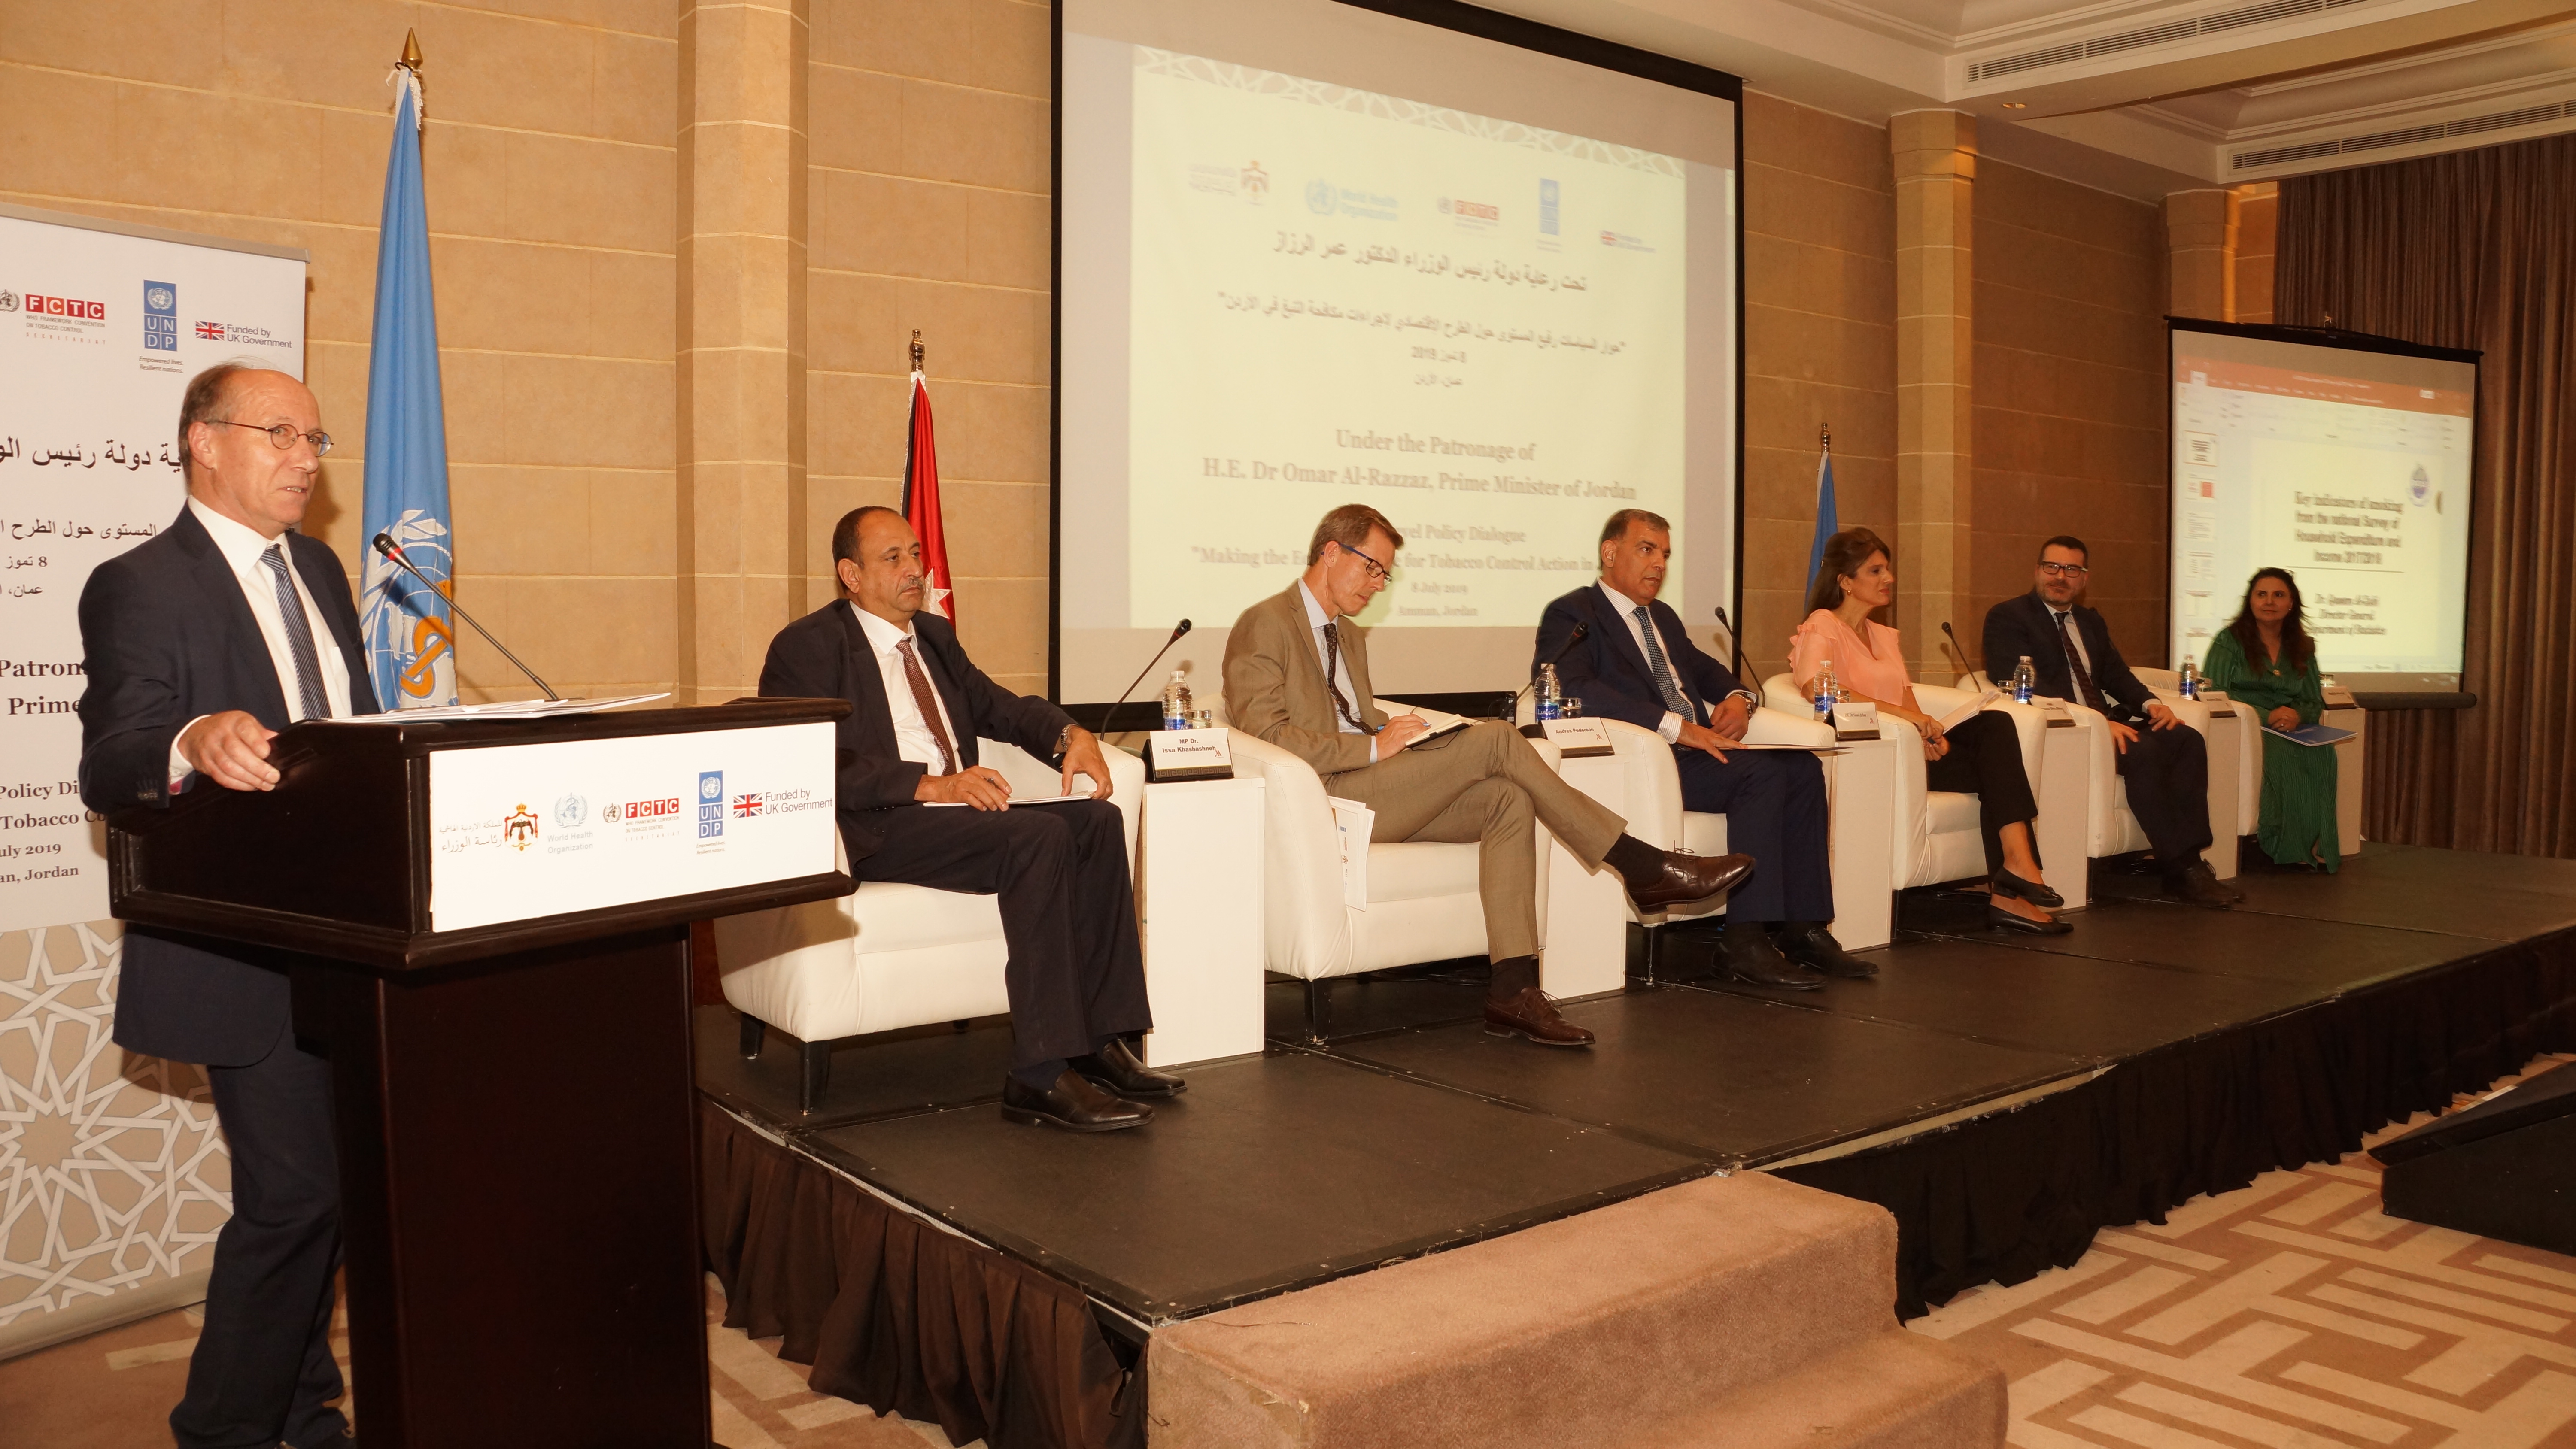 Making the economic case for tobacco control action in Jordan